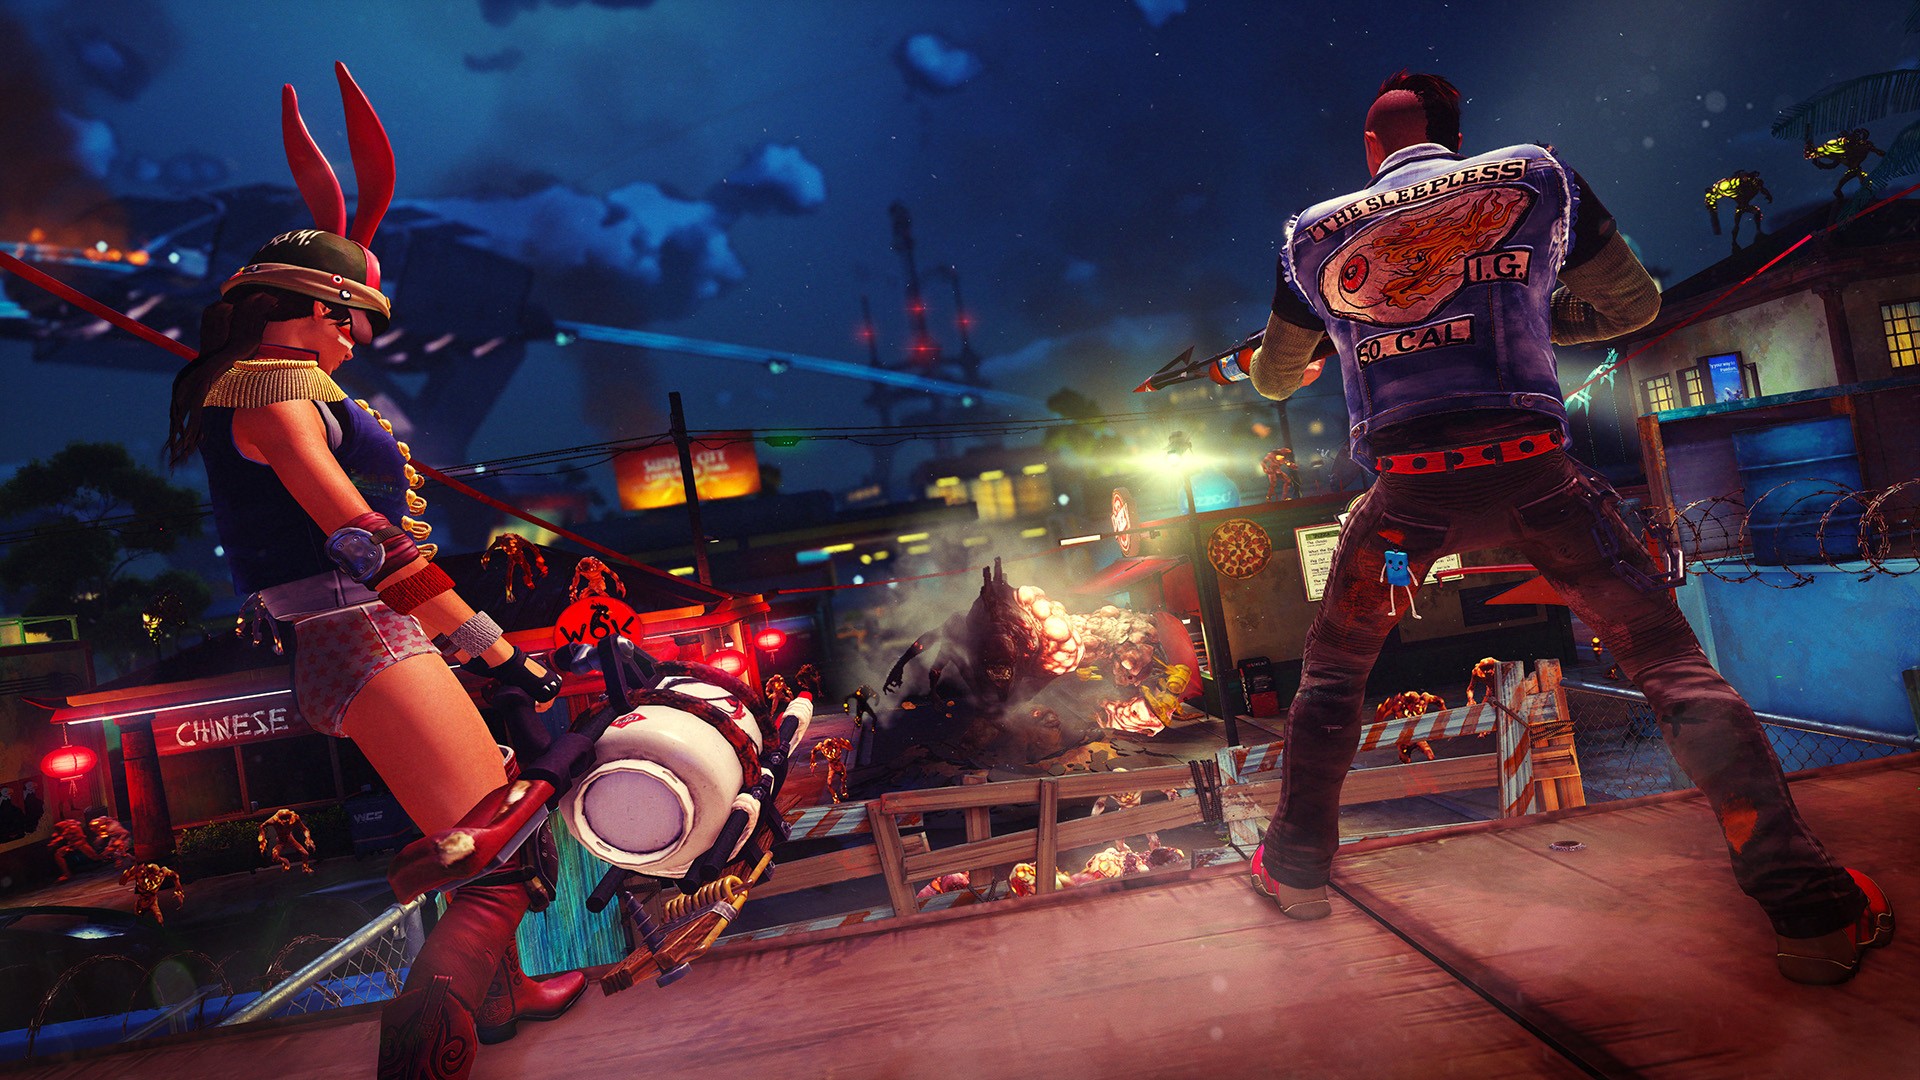 Sunset Overdrive Gameplay Videos Showcase More Crazy And Explosive Action